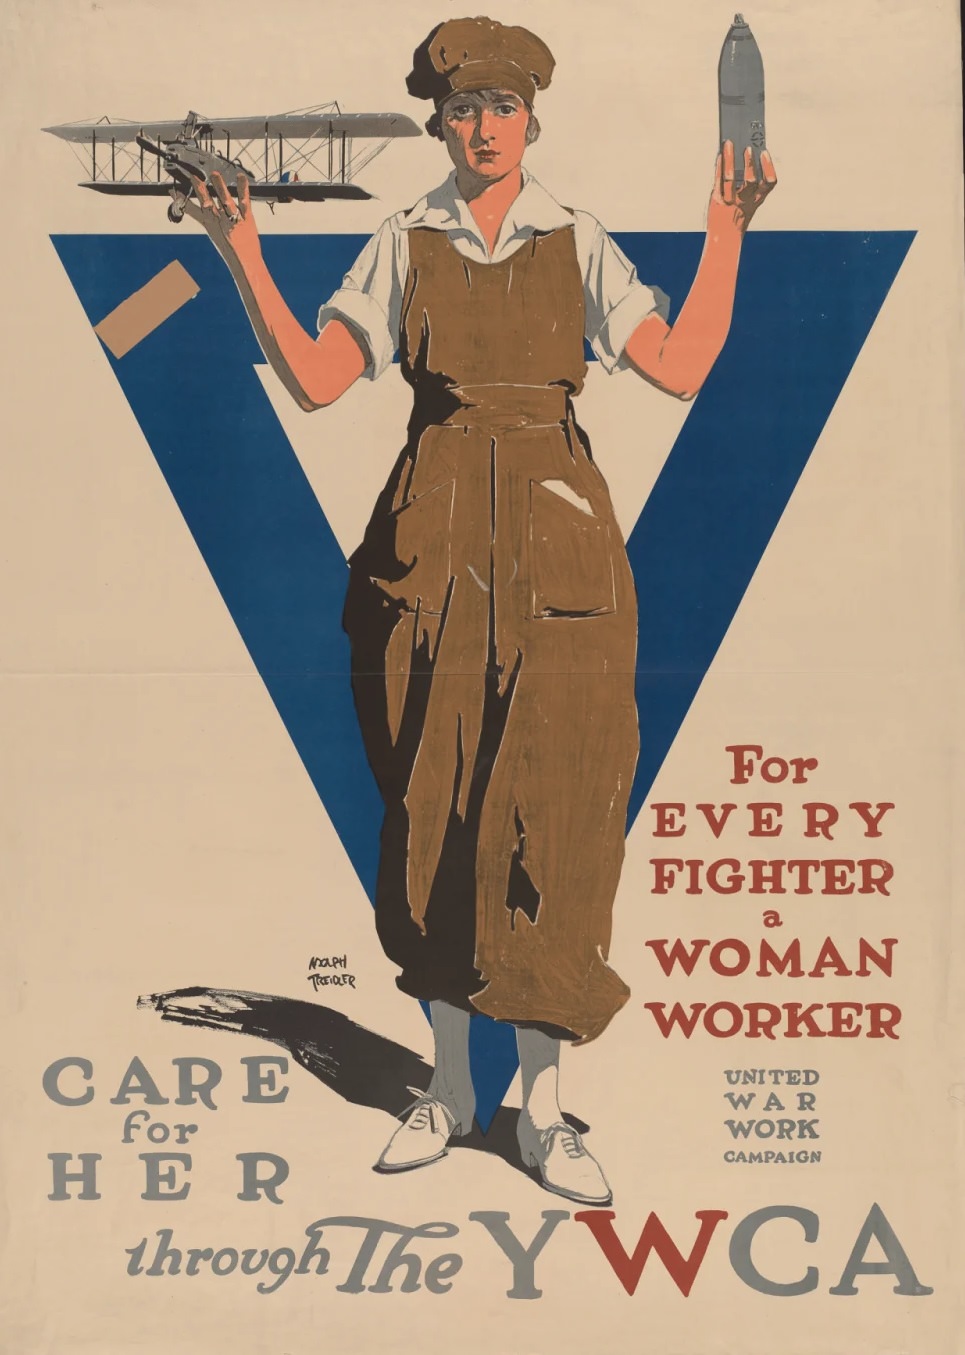 For every fighter a woman worker.